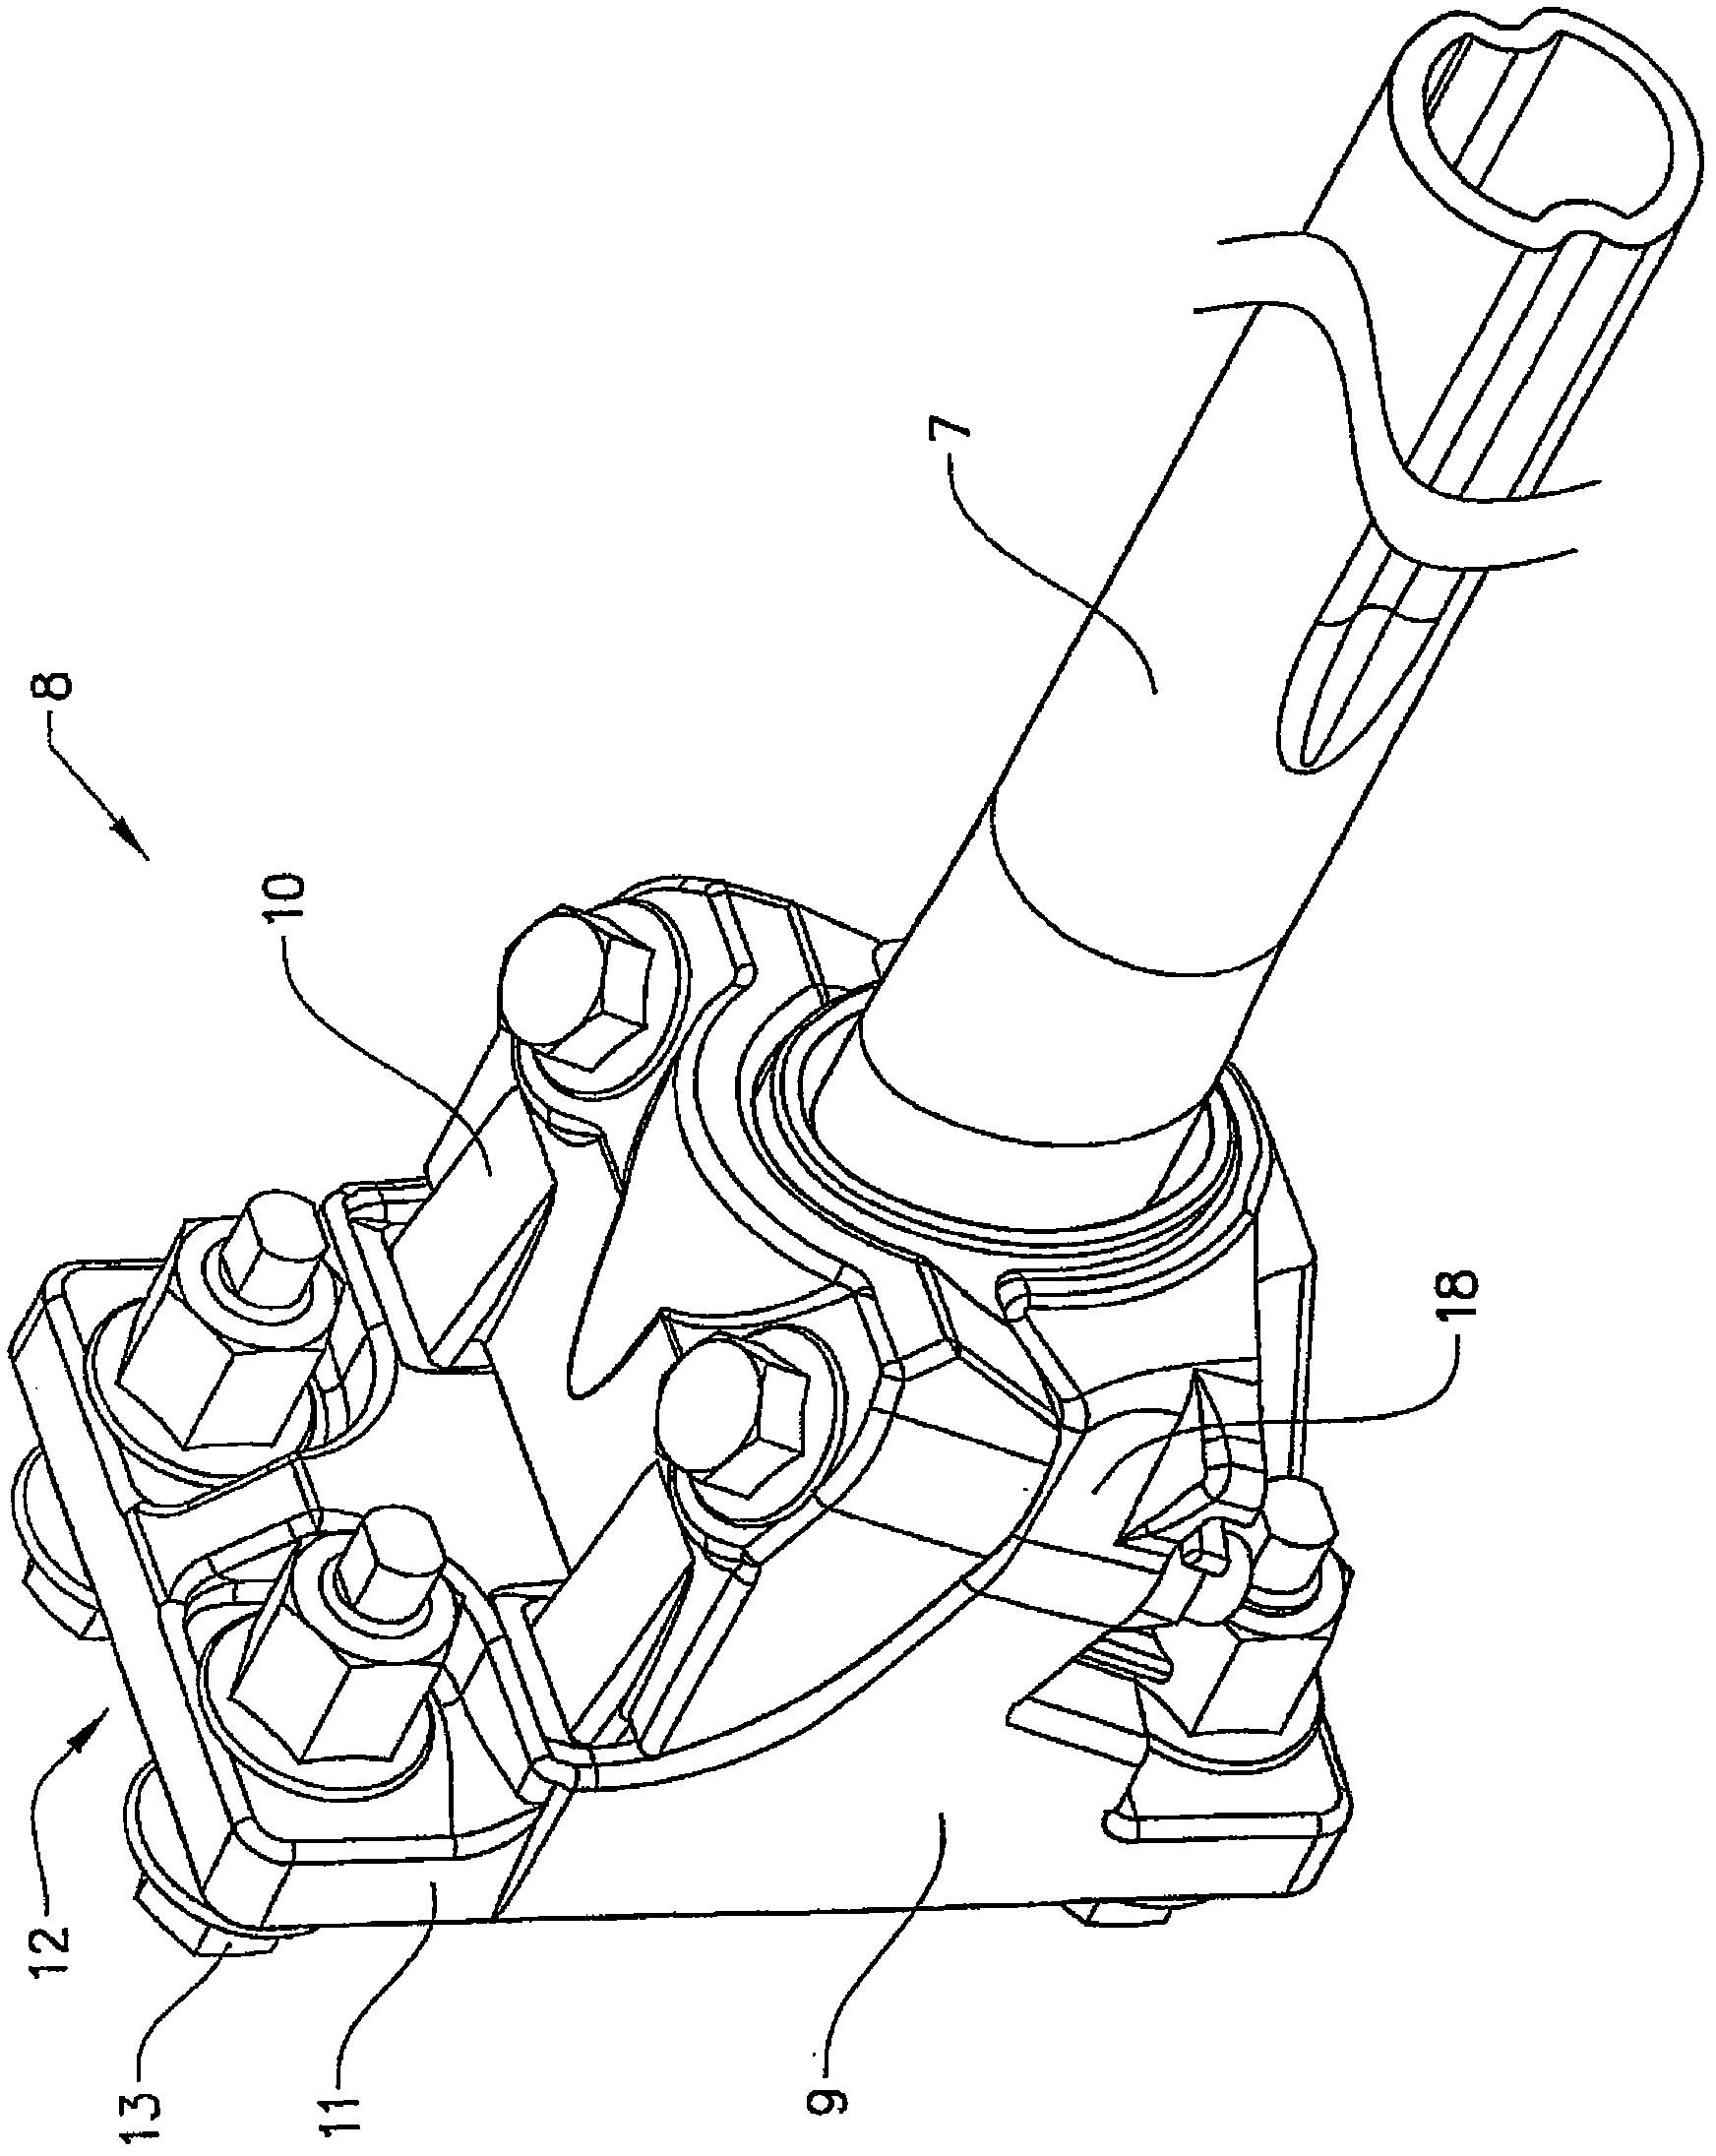 A device for attaching a stay to a vehicle frame and a vehicle comprising the device